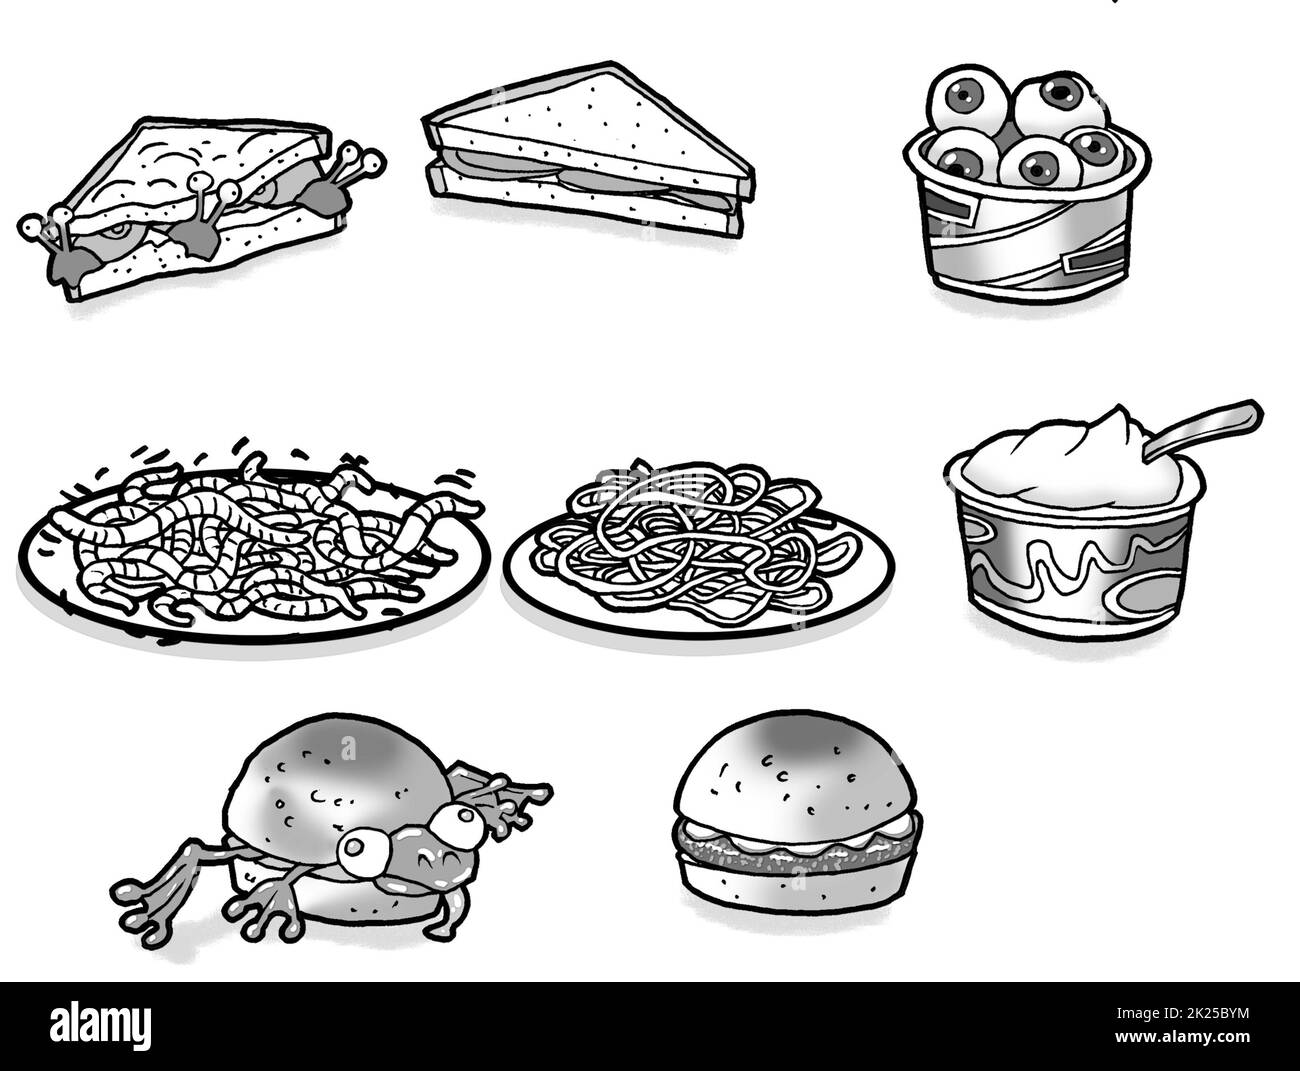 Black & white art, showing a selection of creepy, fictional, Halloween food, children's educational activity pages, colouring in, monster party menus. Stock Photo